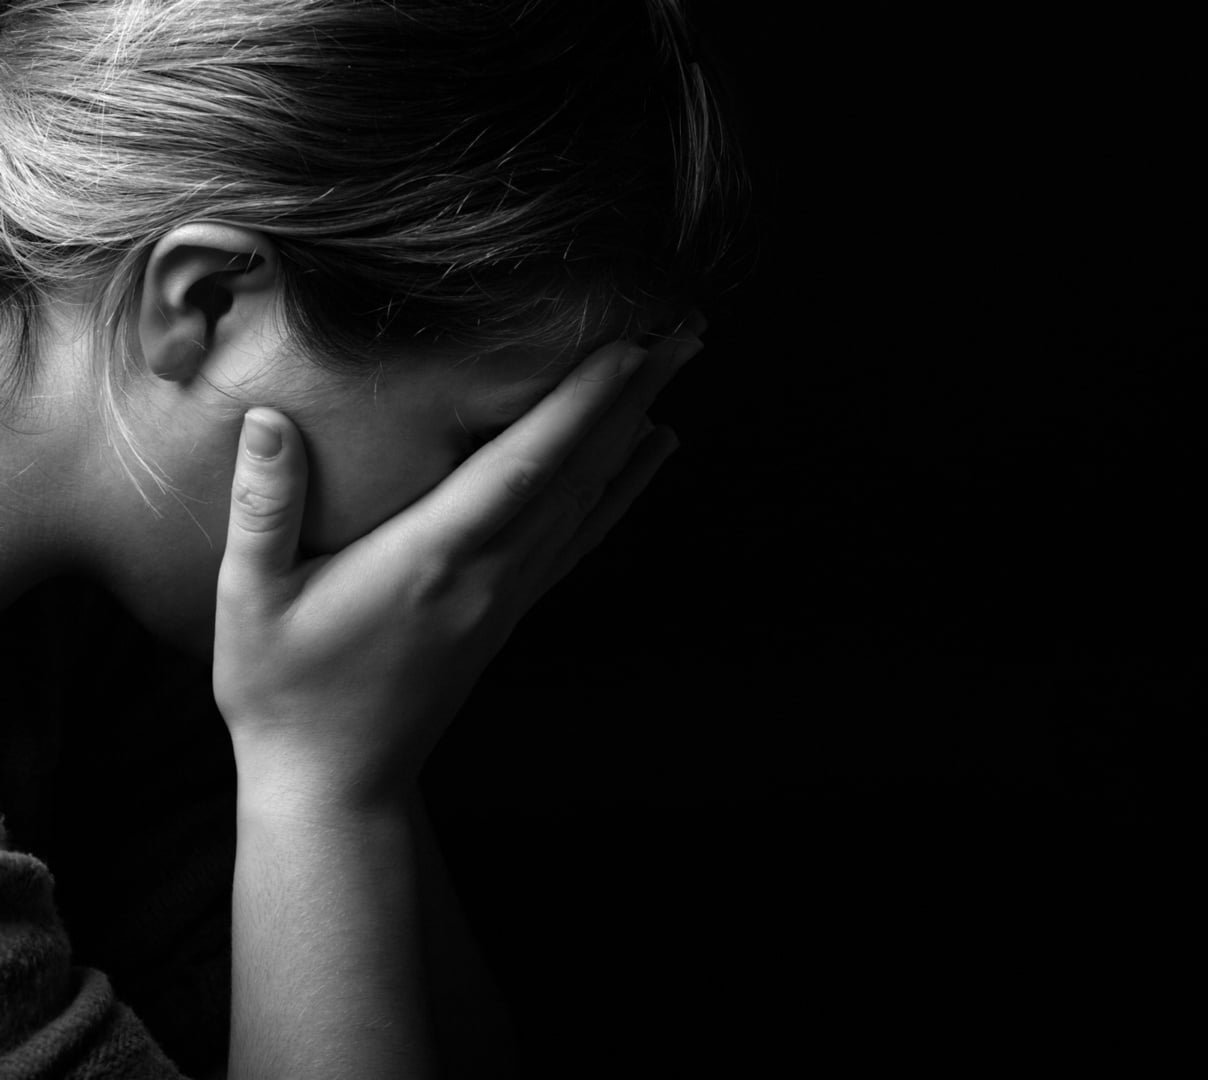 What To Do When Youâre Not Coping: Postnatal Depression